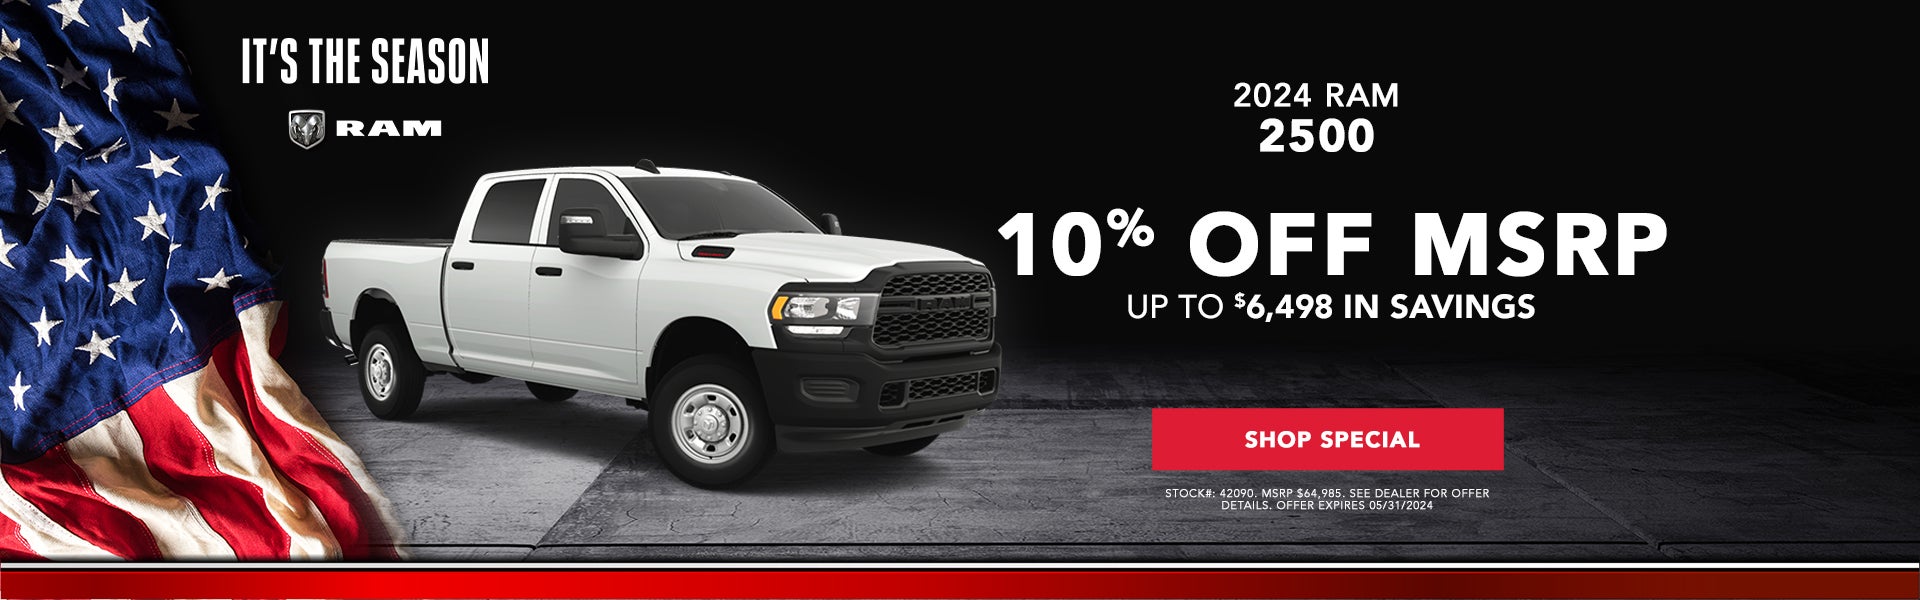 10% off MSRP Up To $6,498 in Savings